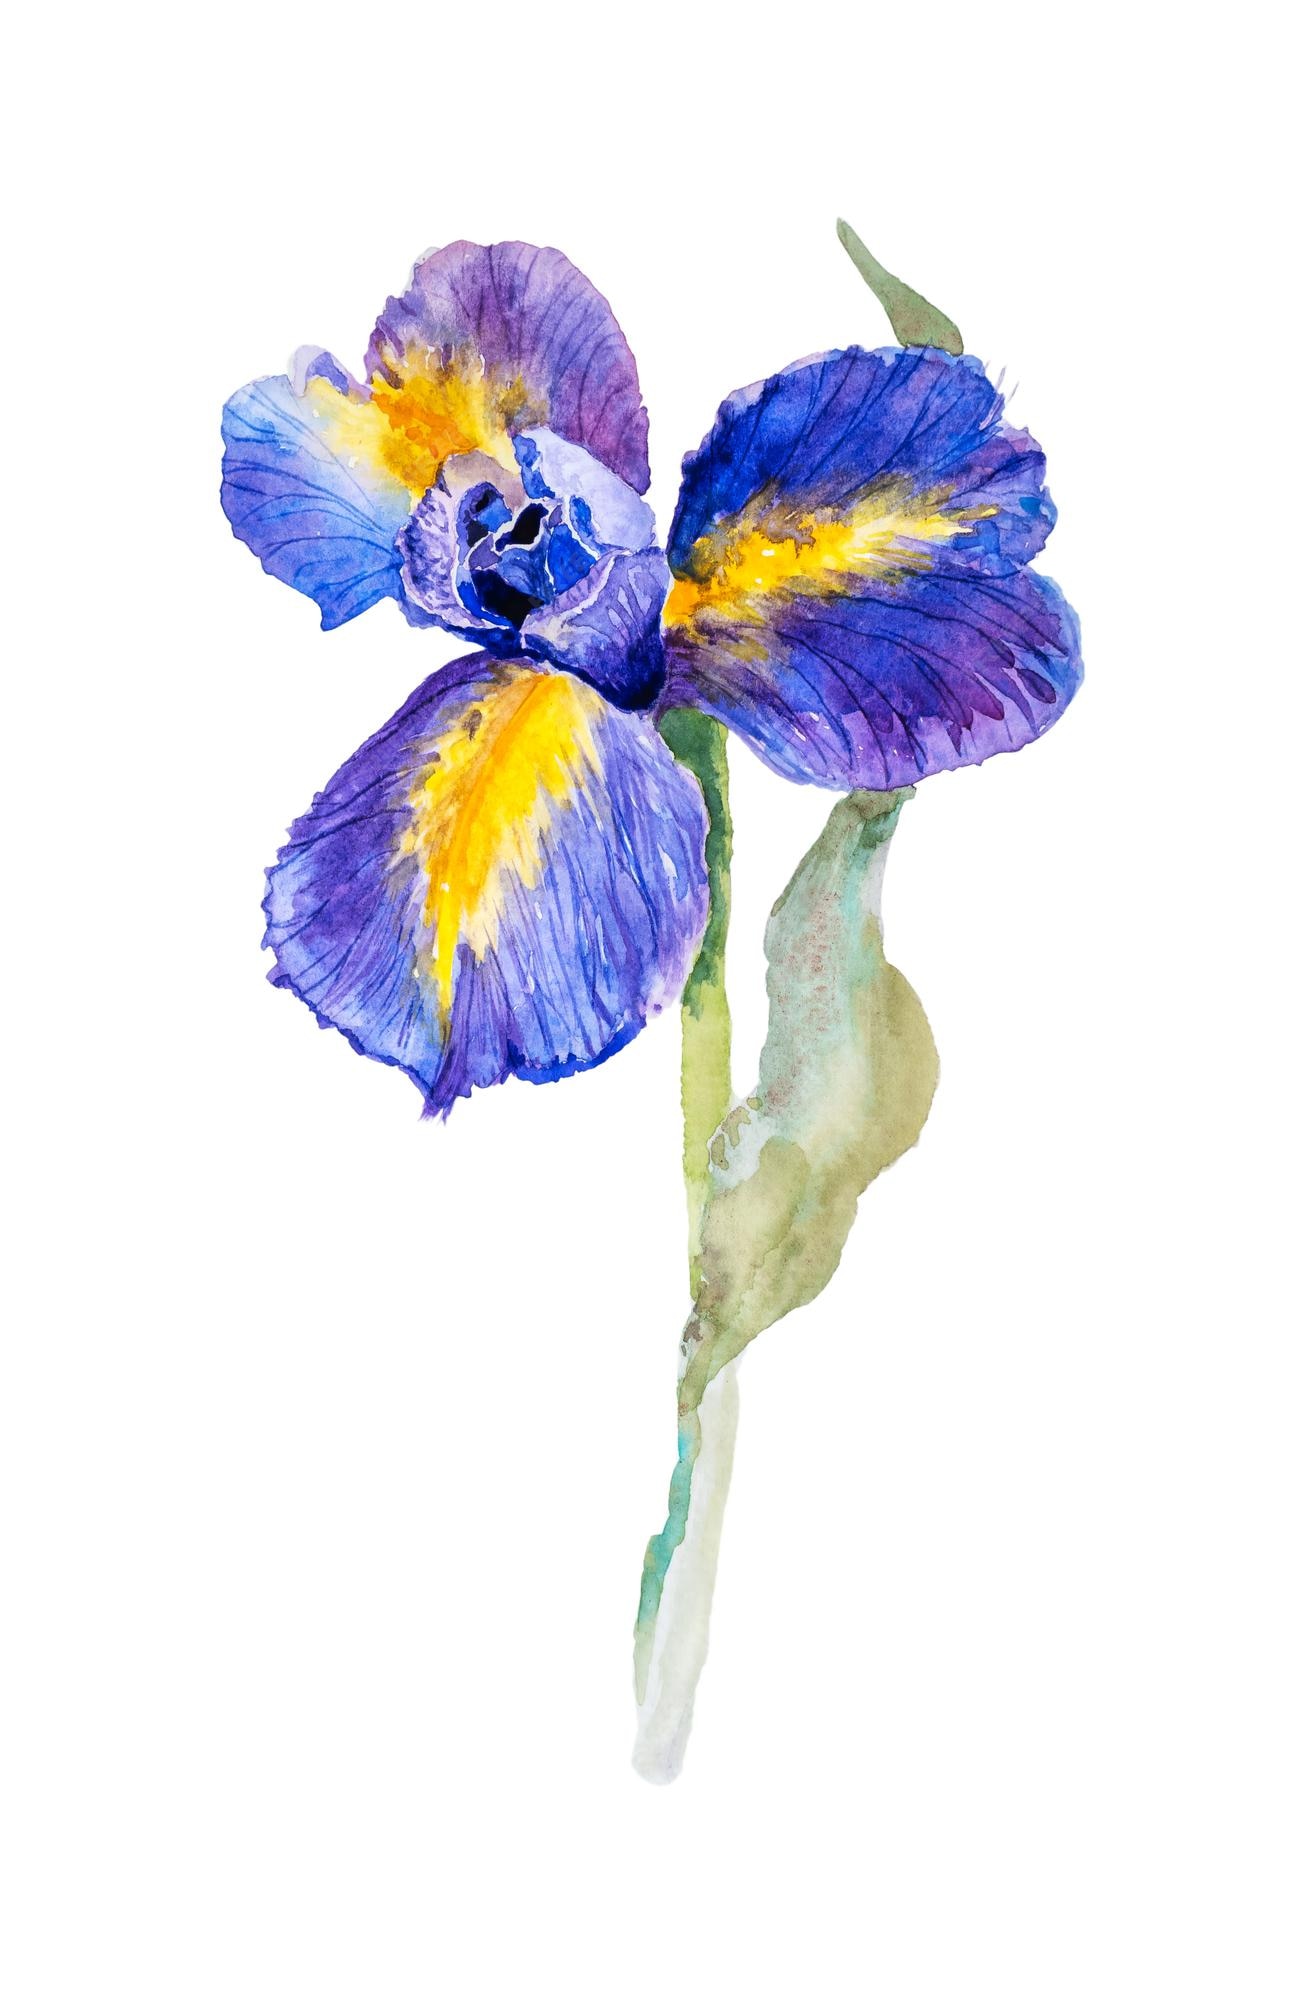 Beautiful Blue Iris Flower With Bud Branches And Leaves Isolated